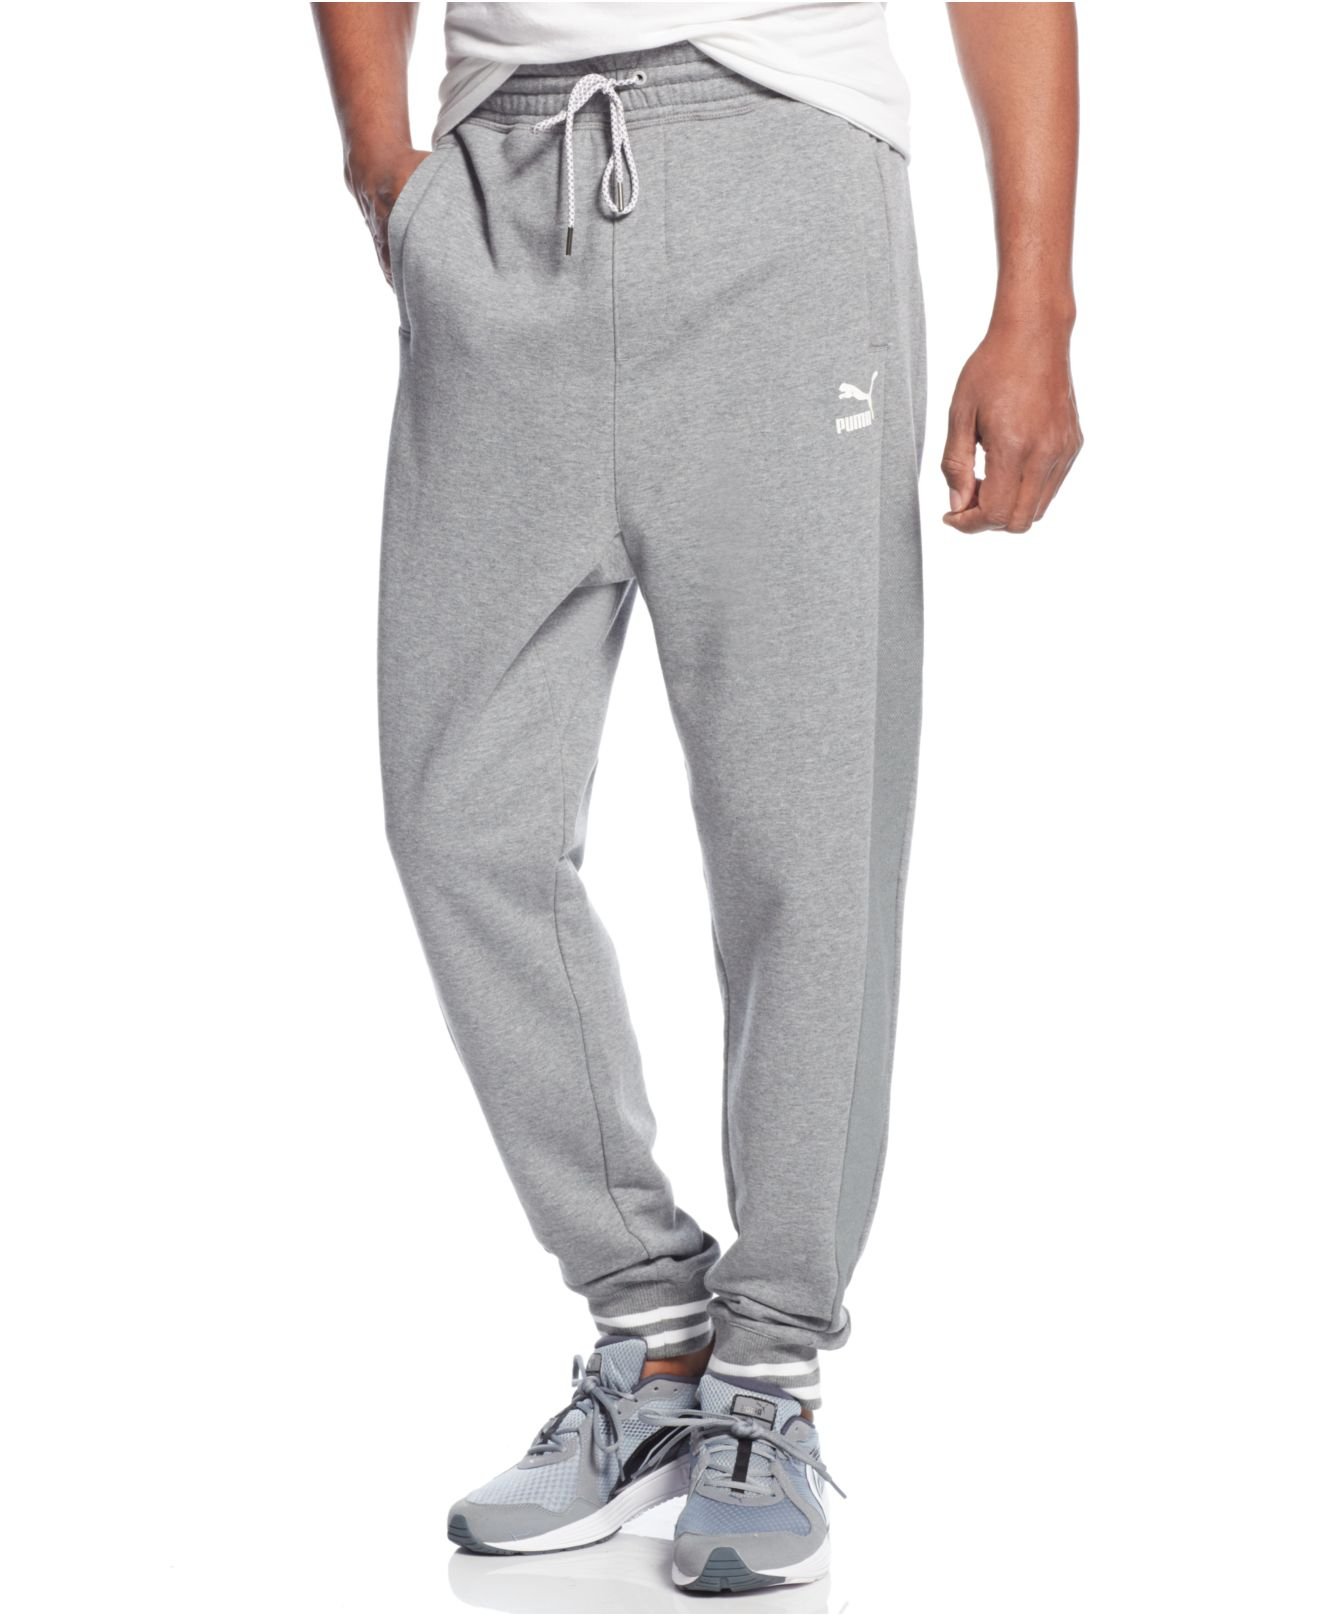 Download PUMA Striped-Cuff Joggers in Grey Heather (Gray) for Men ...